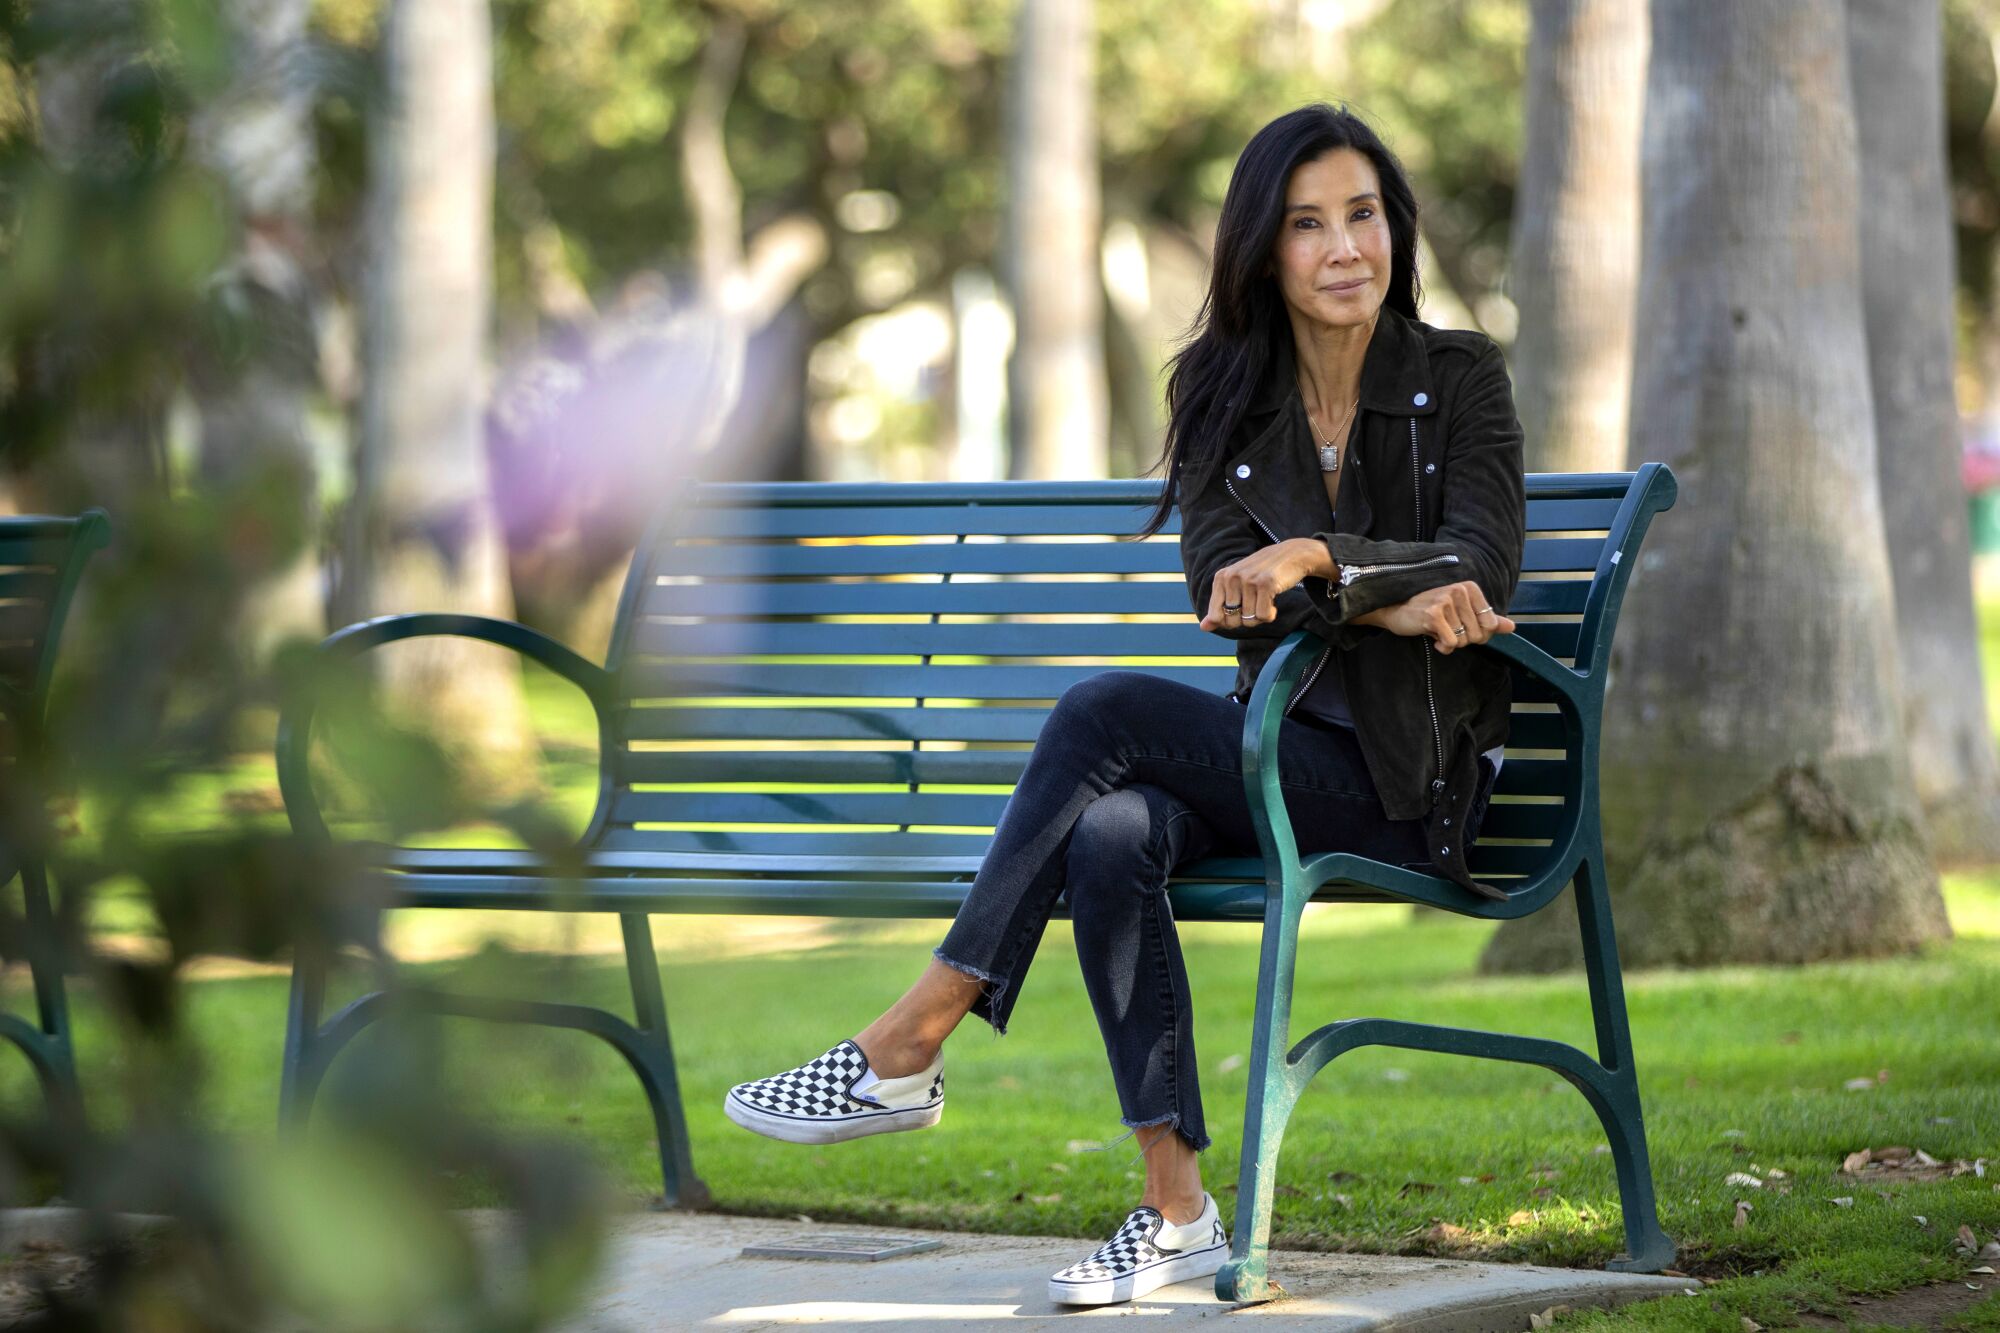 Journalist Lisa Ling sits on a bench in a park.